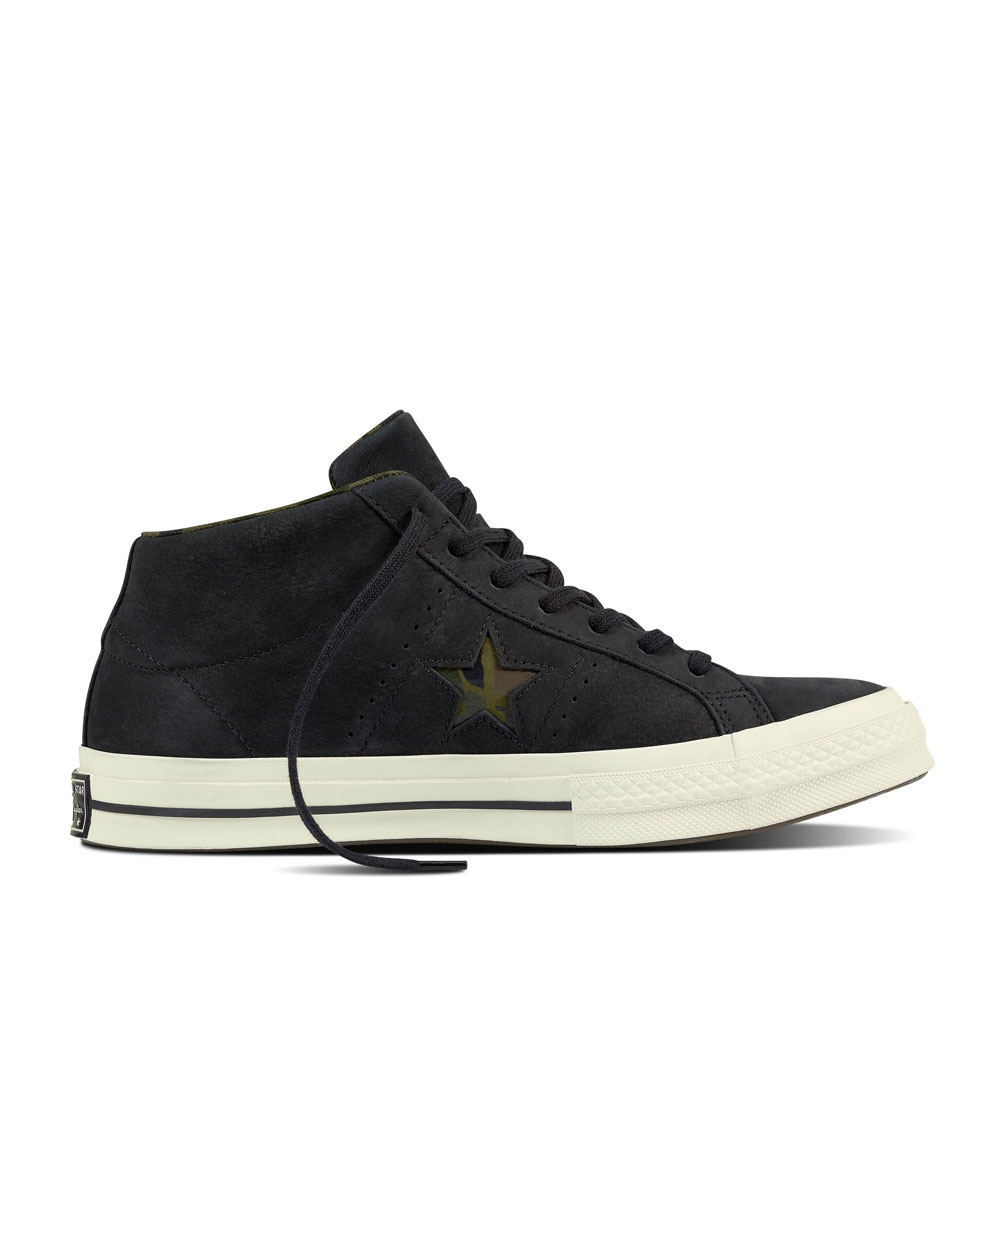 Converse One Star Mid Leather (black/egret/herbal)